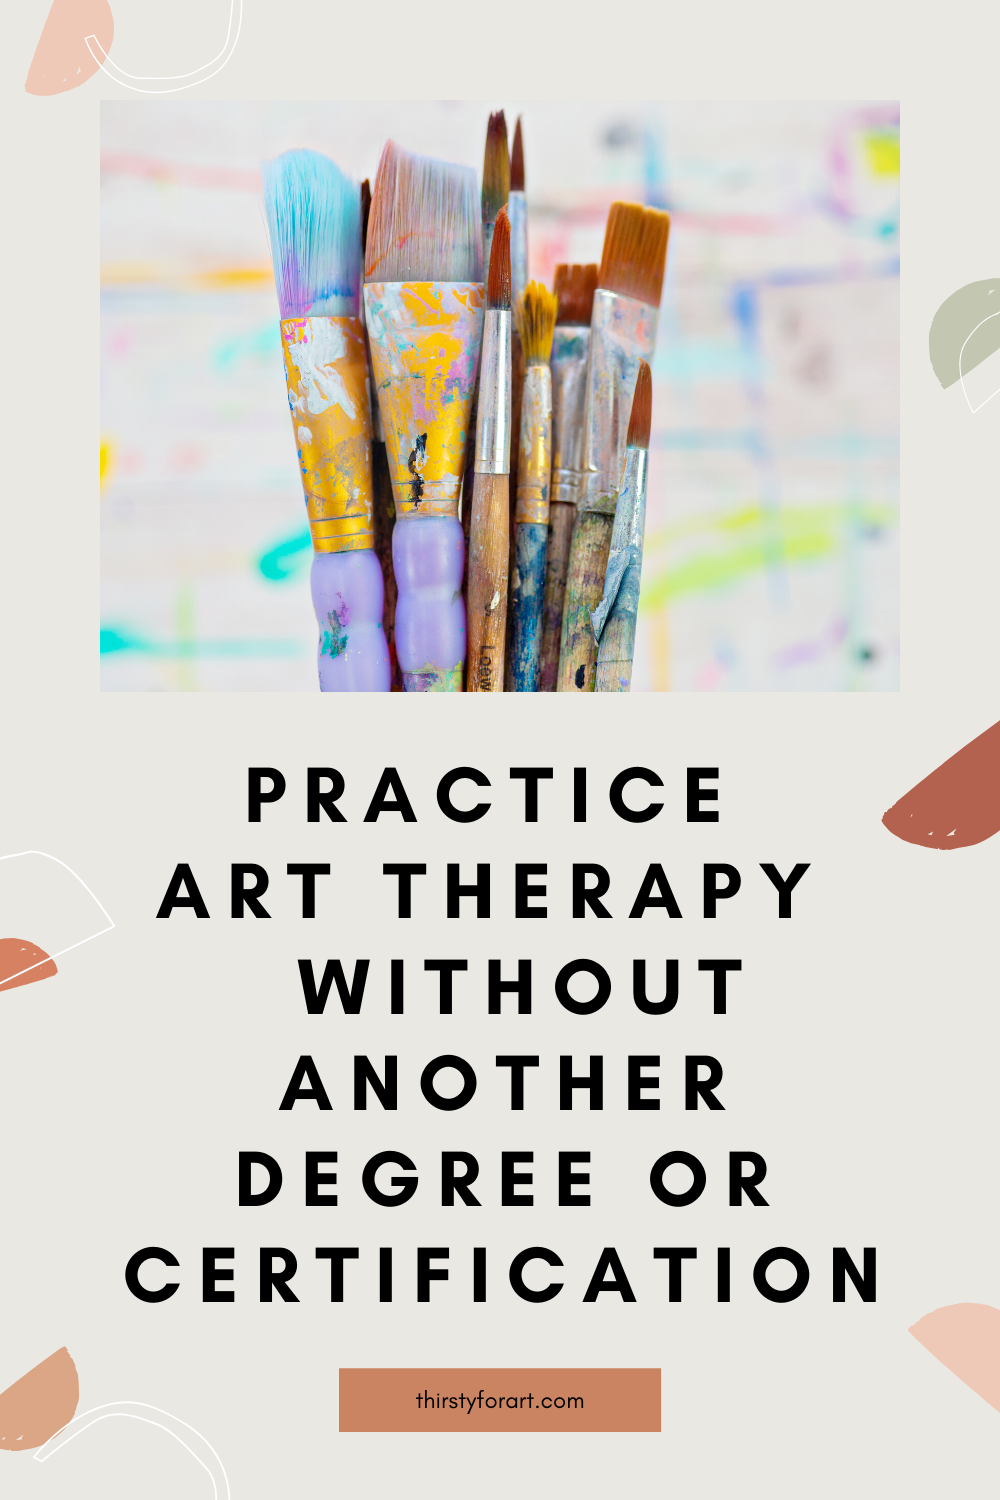 Арт-терапия креативная. Art is Therapy. Цитаты про арт терапию. Therapy Sans. Without another